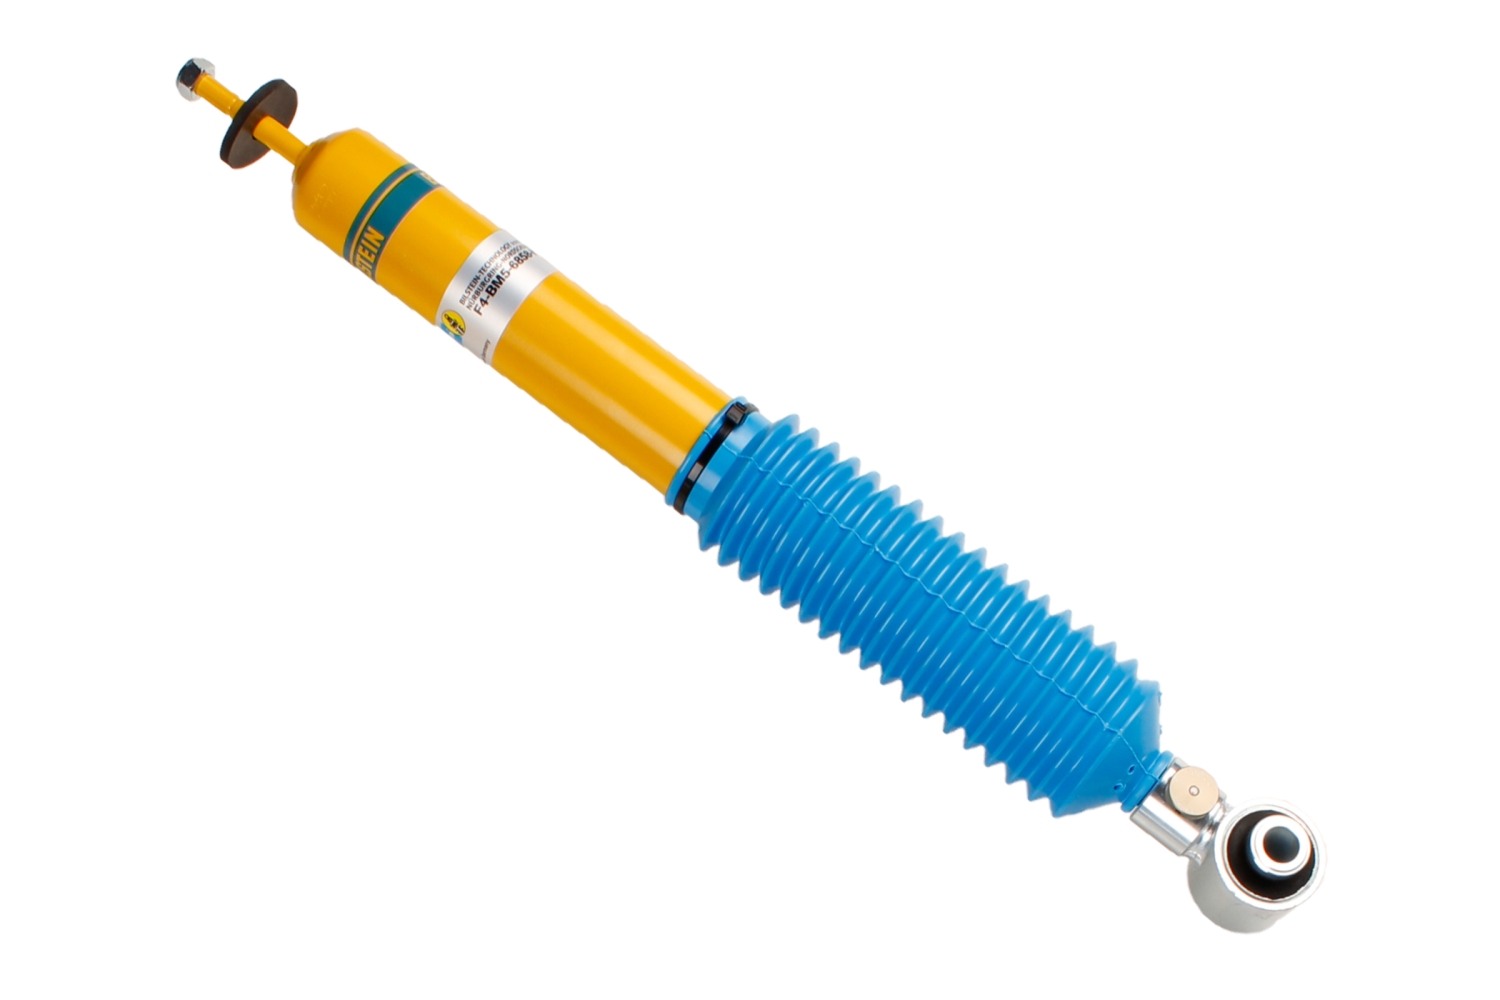 Bilstein B16 PSS9 coilovers 48-169301 AUDI - A4 Cabrio (8H7, 8HE) - 1.8 T, 1.8 T quattro, 2.0, 2.0 TDI, 2.0 TFSI, 2.0 TFSi quattro, 2.4, 2.5 TDI, 2.7 TDI, 3.0, 3.0 quattro, 3.0 TDI quattro, 3.2 FSI, 3.2 FSI quattro 96 -188 kW - 04/02-